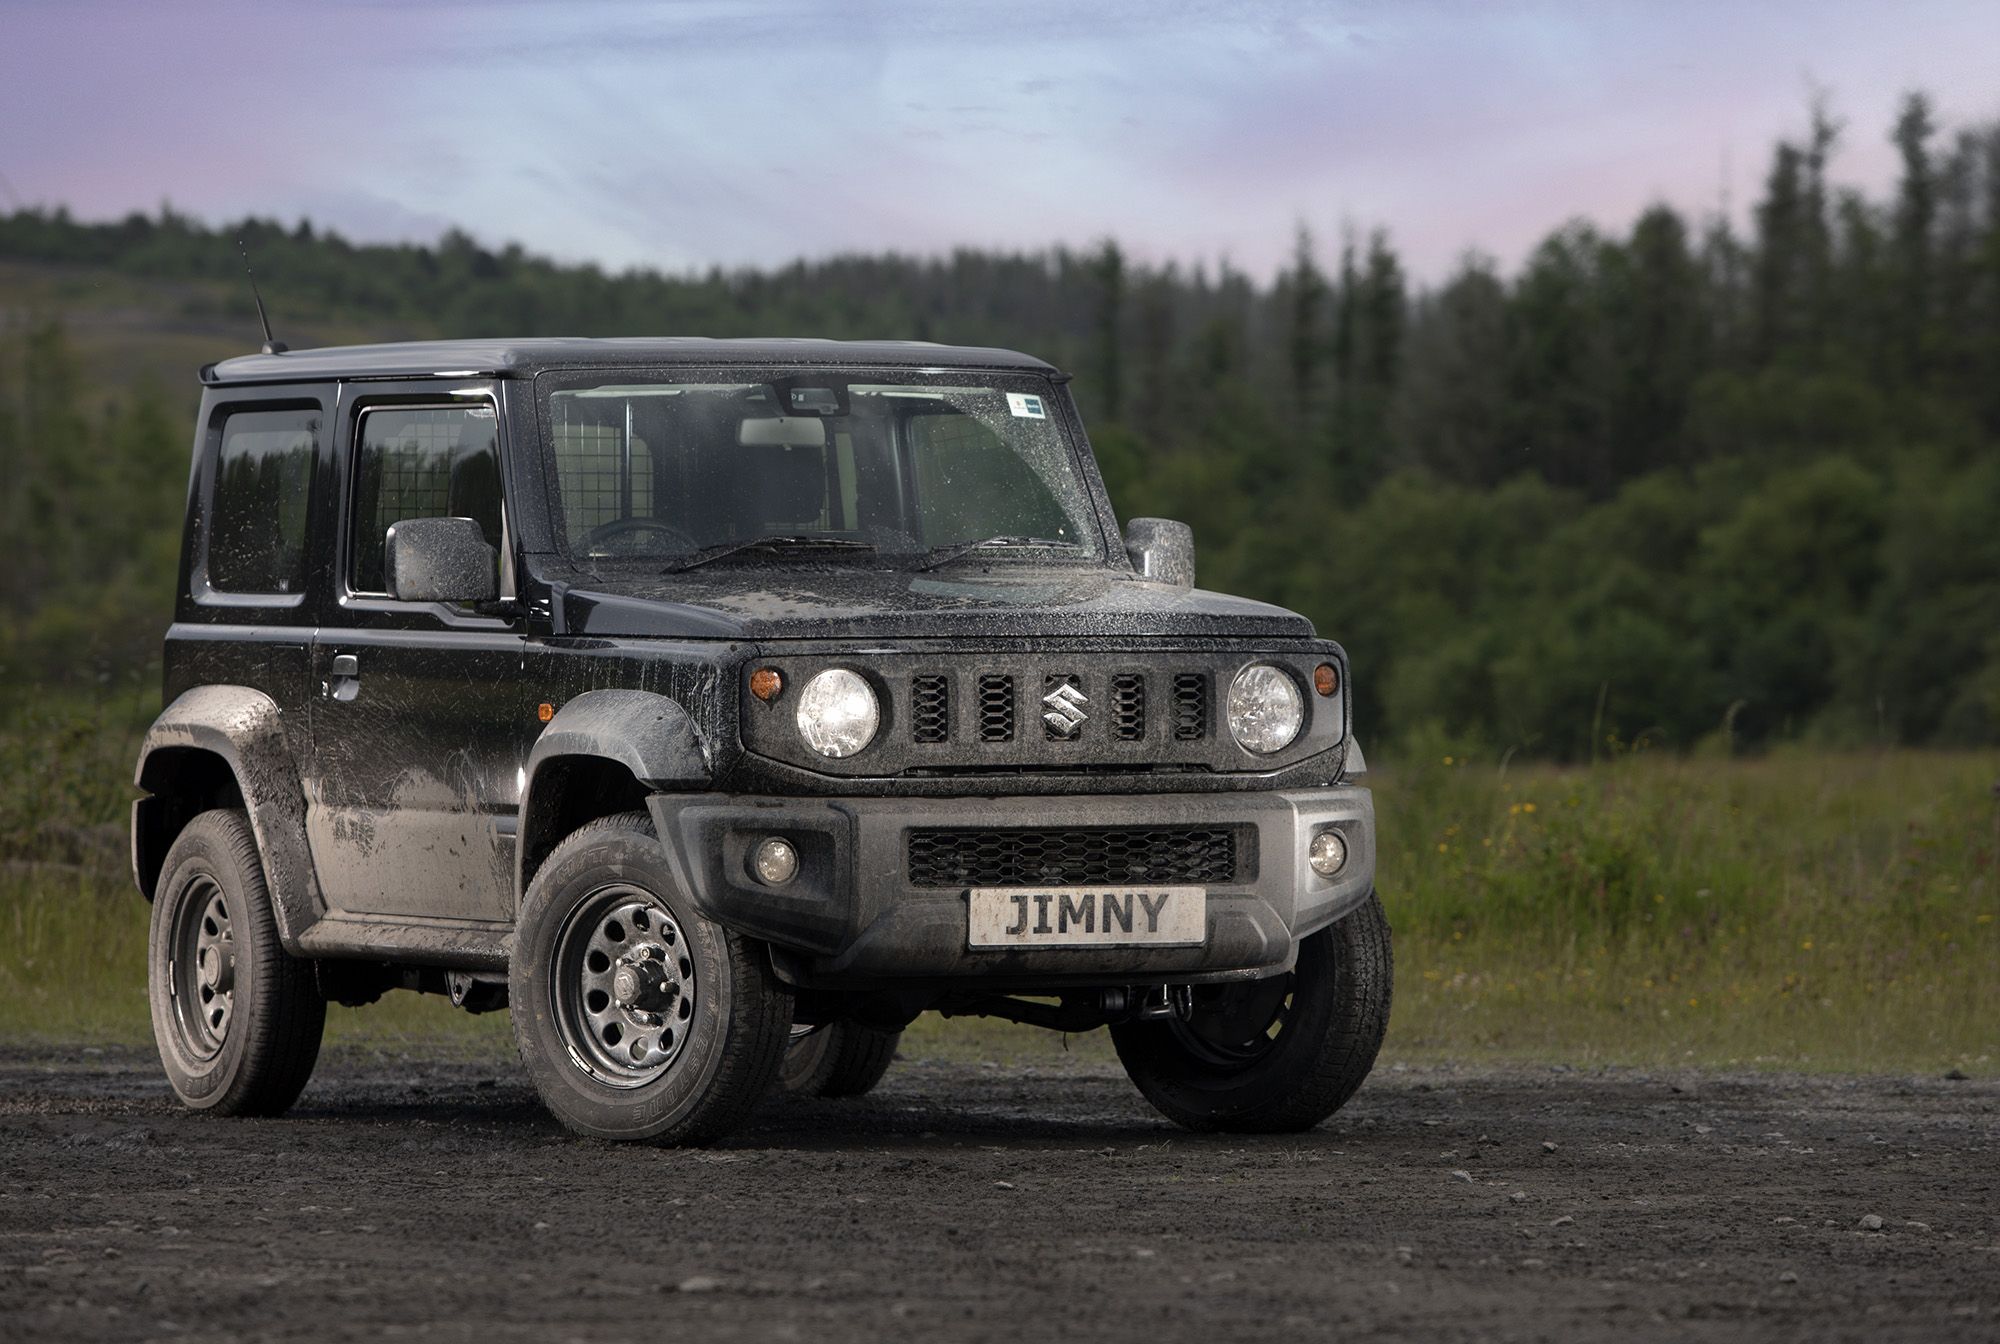 Battery-electric Suzuki Jimny confirmed for Europe